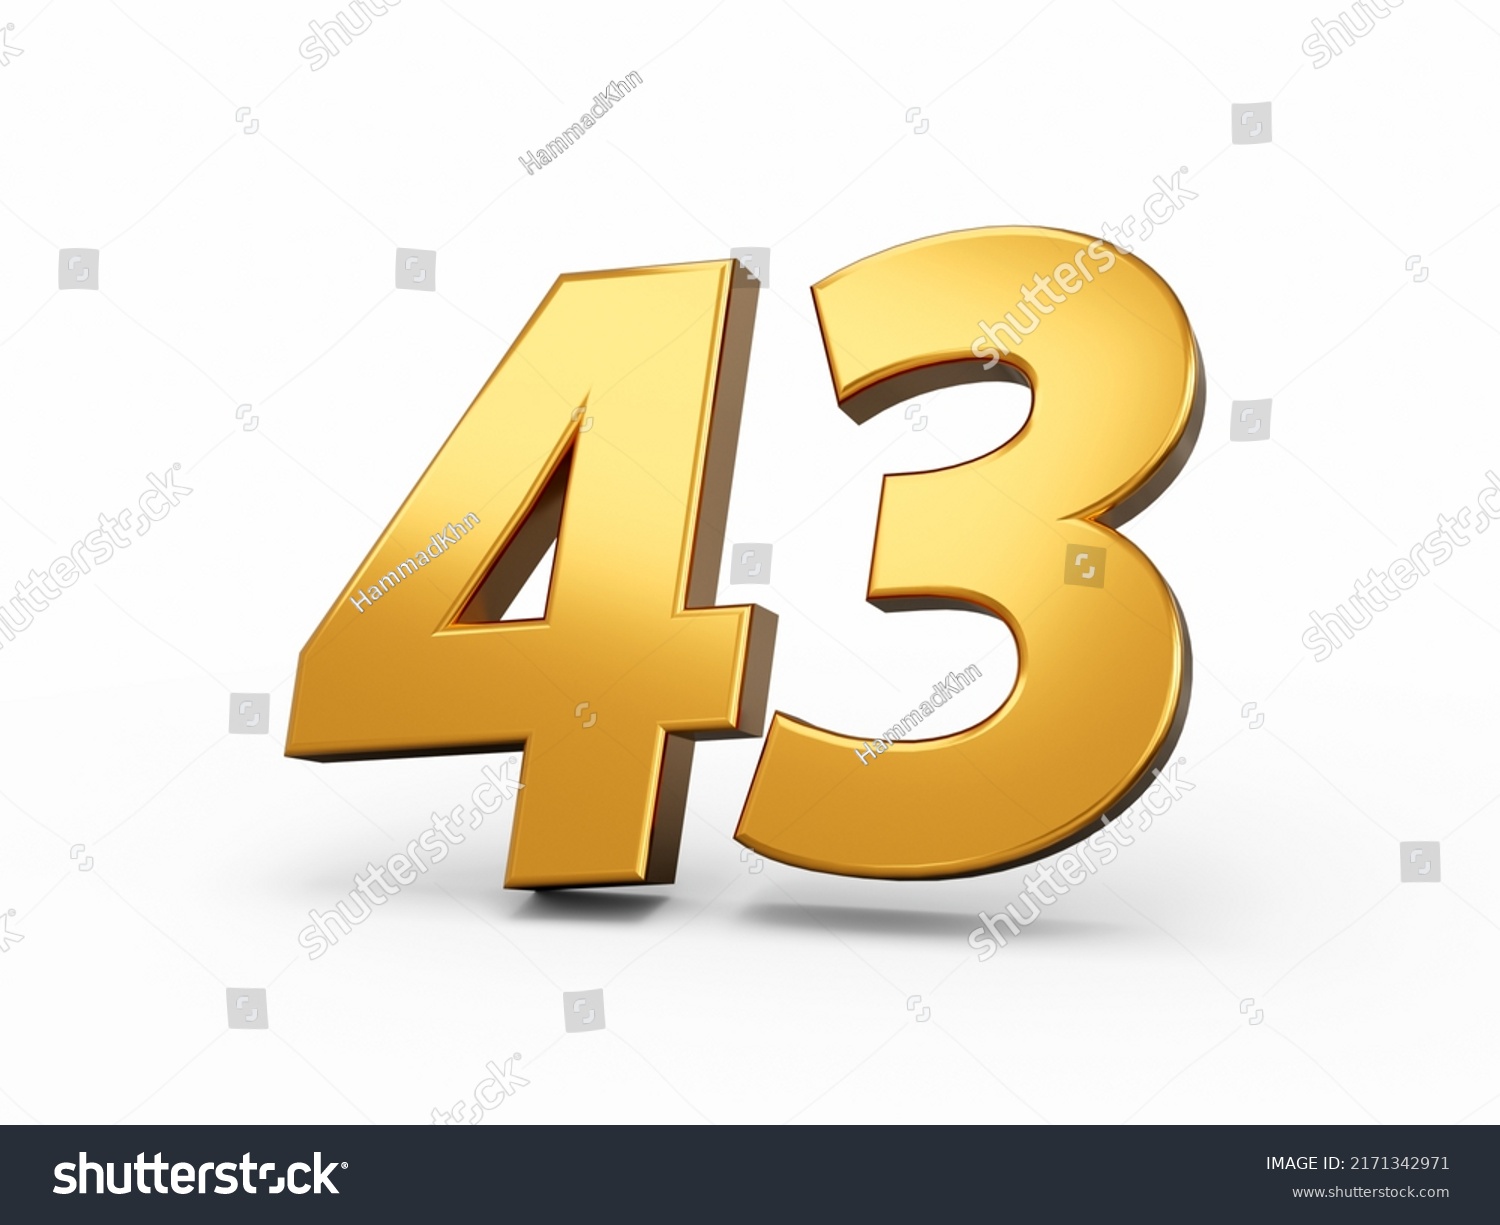 221 Three fourty Images, Stock Photos & Vectors | Shutterstock